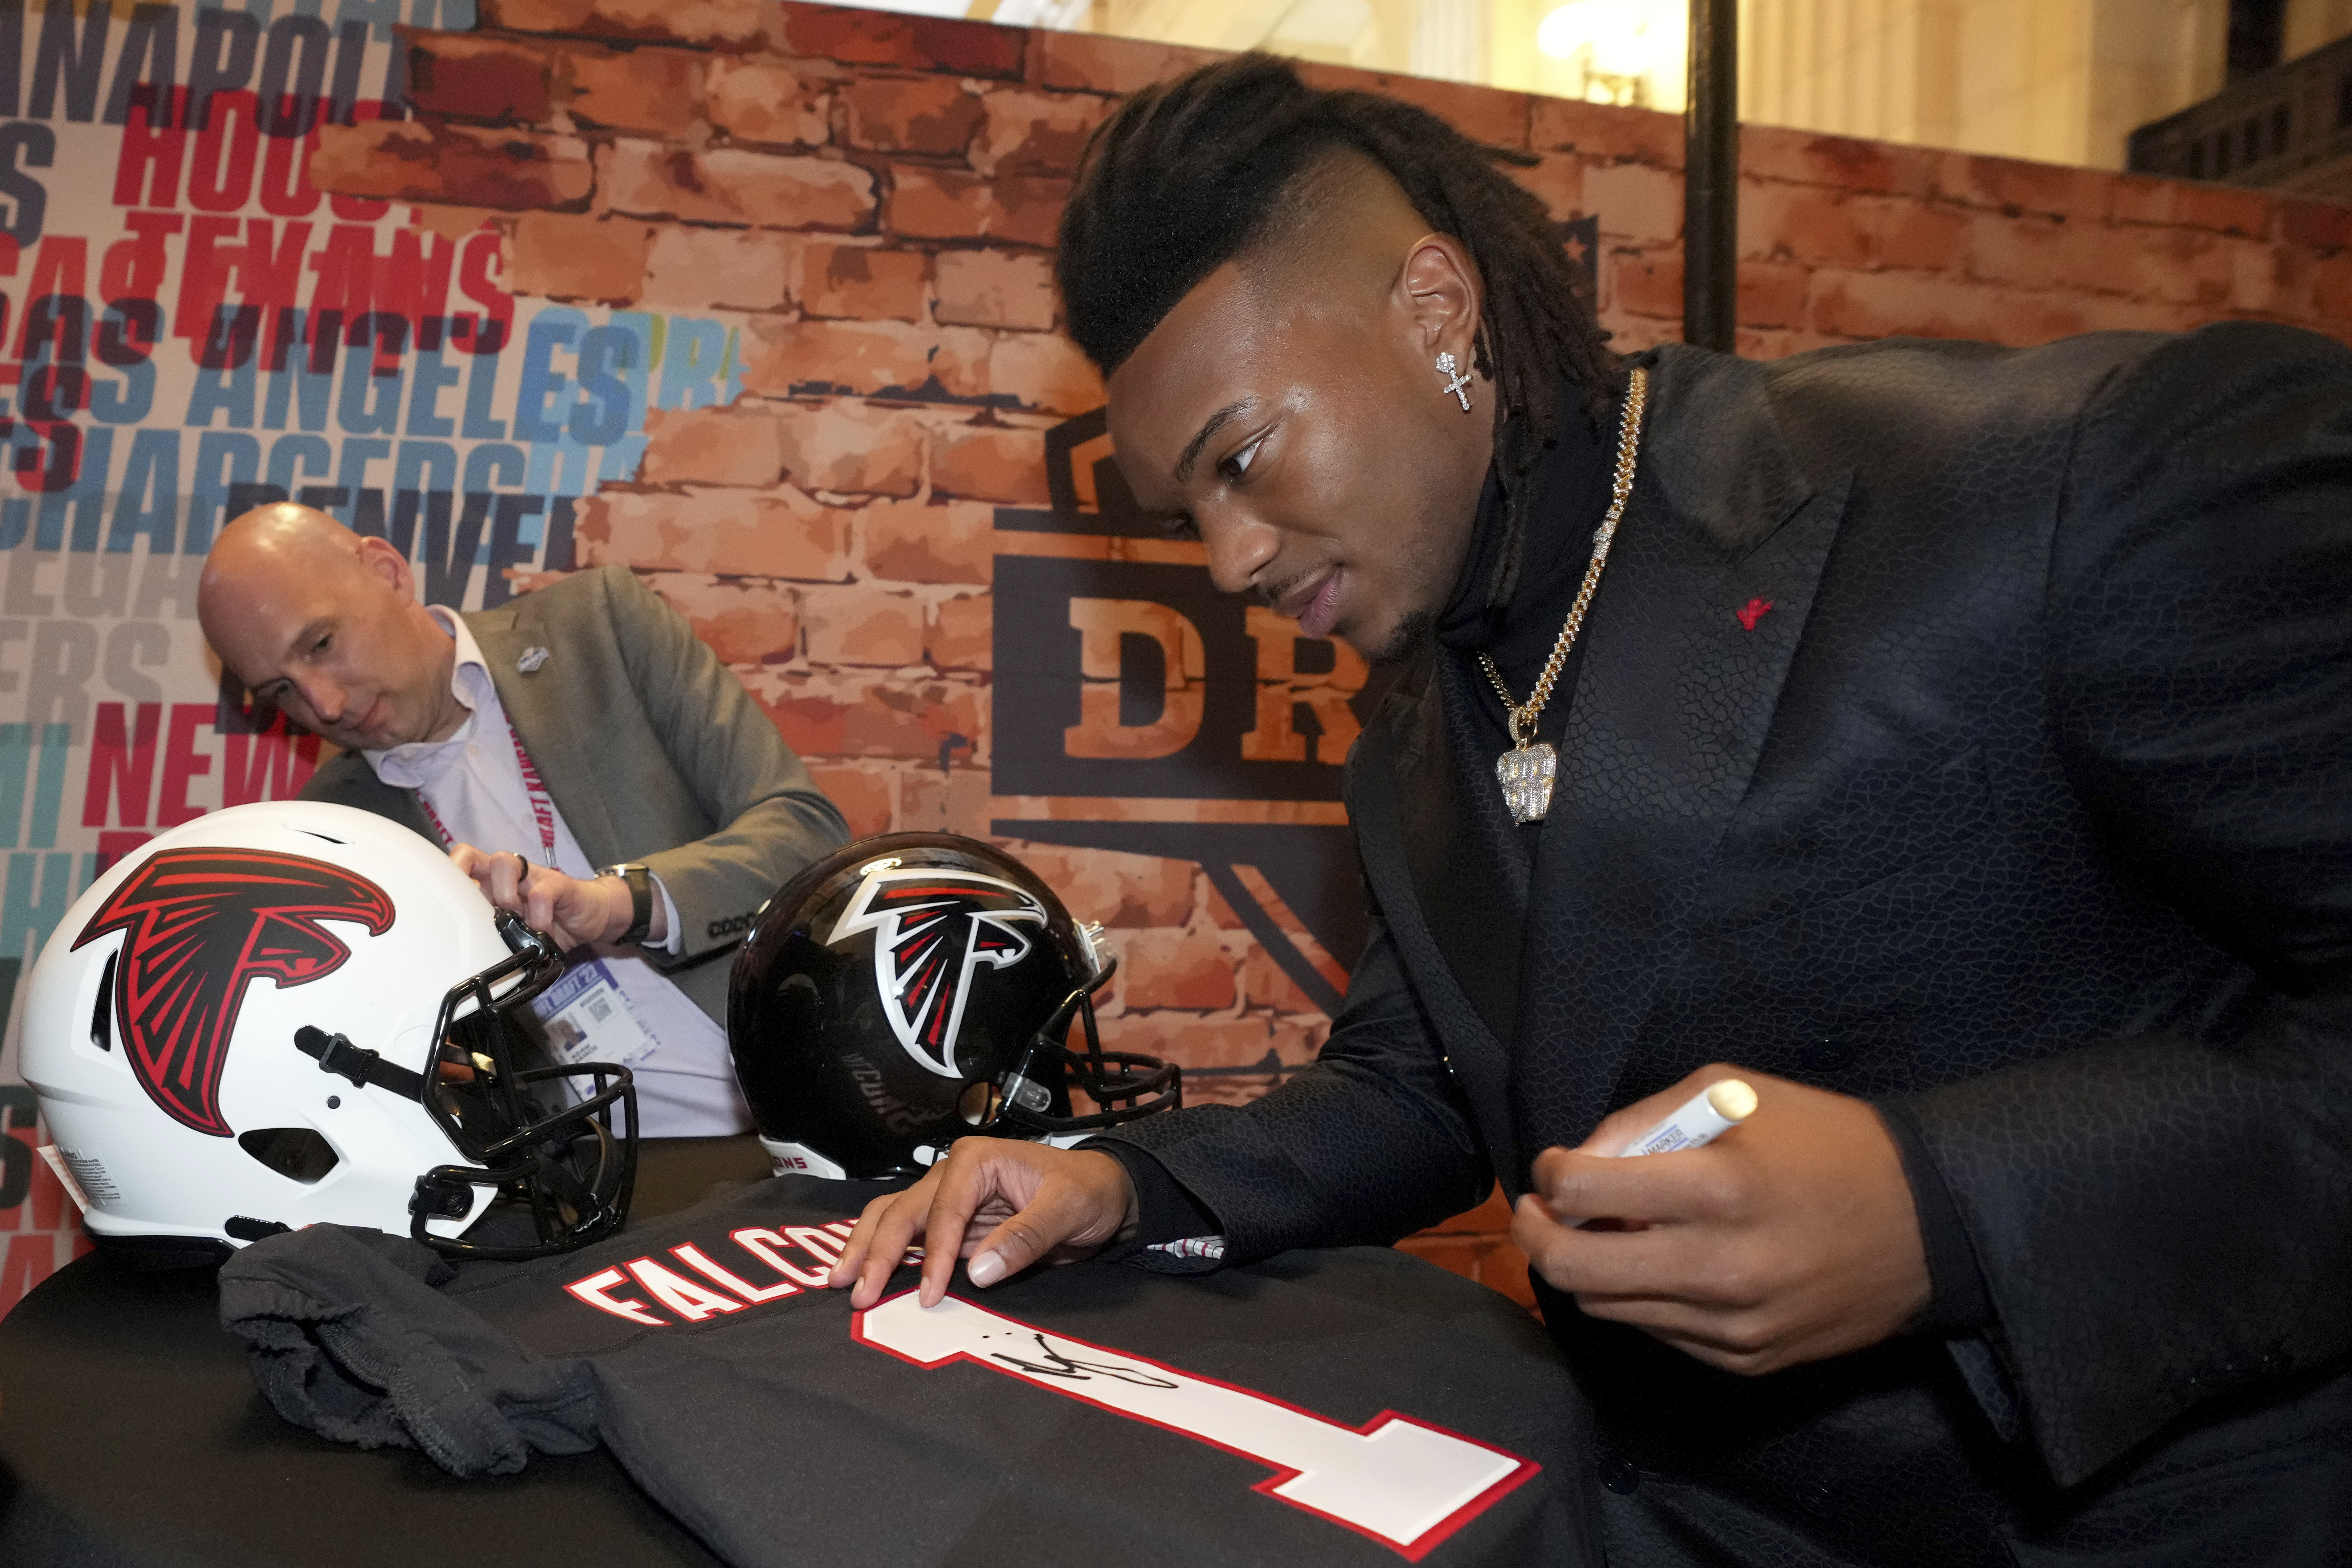 Winners and Losers of the First Round of the 2023 NFL Draft - The